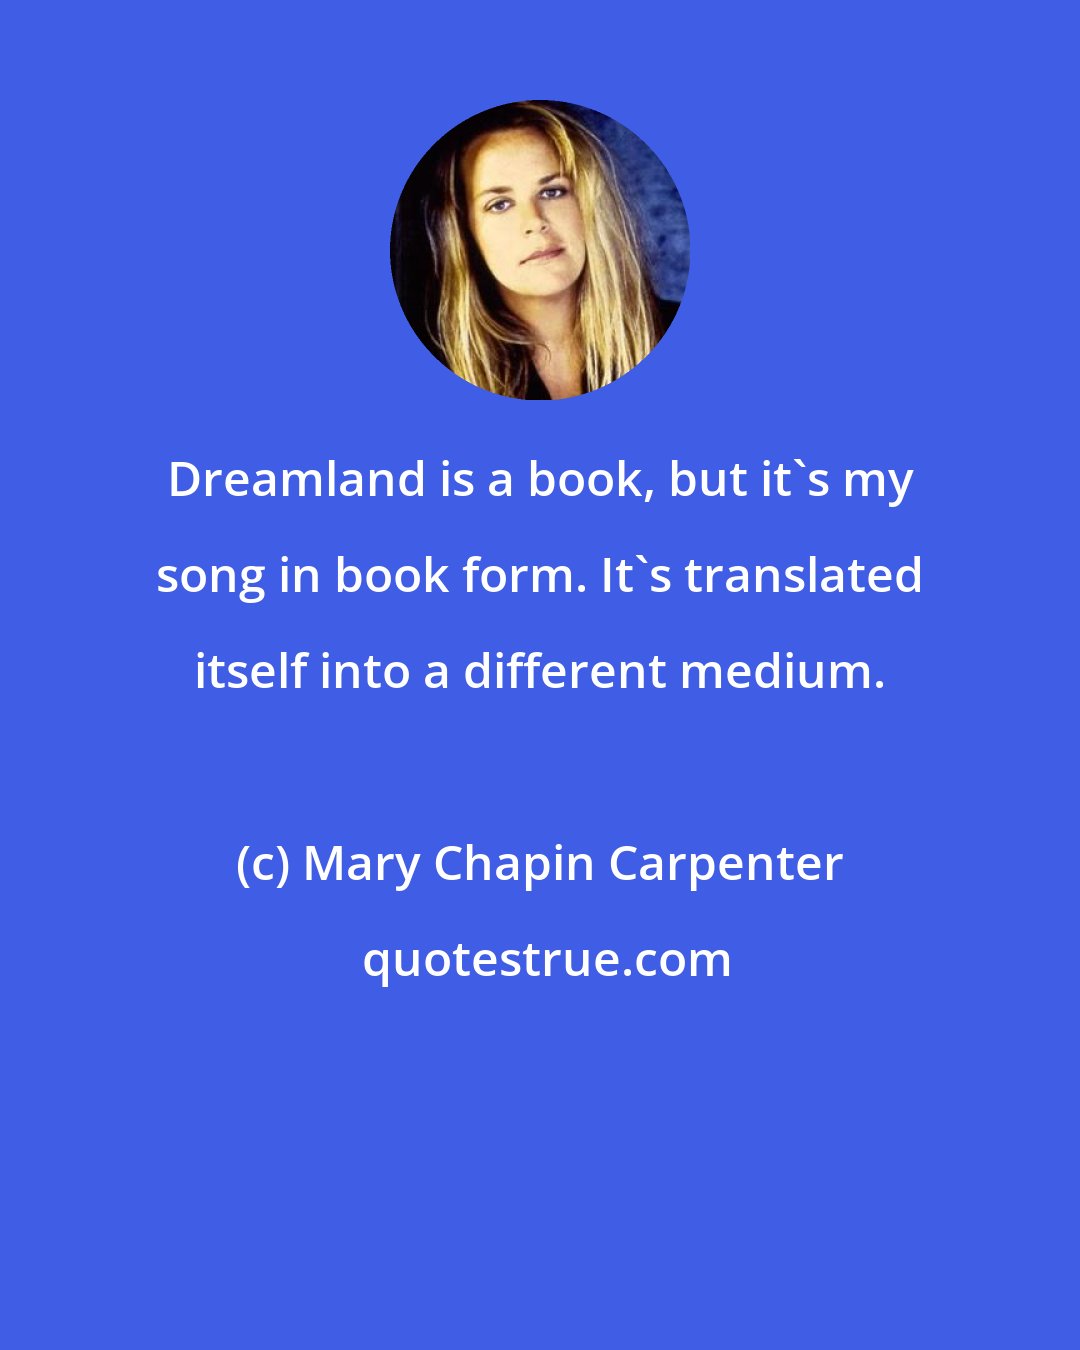 Mary Chapin Carpenter: Dreamland is a book, but it's my song in book form. It's translated itself into a different medium.